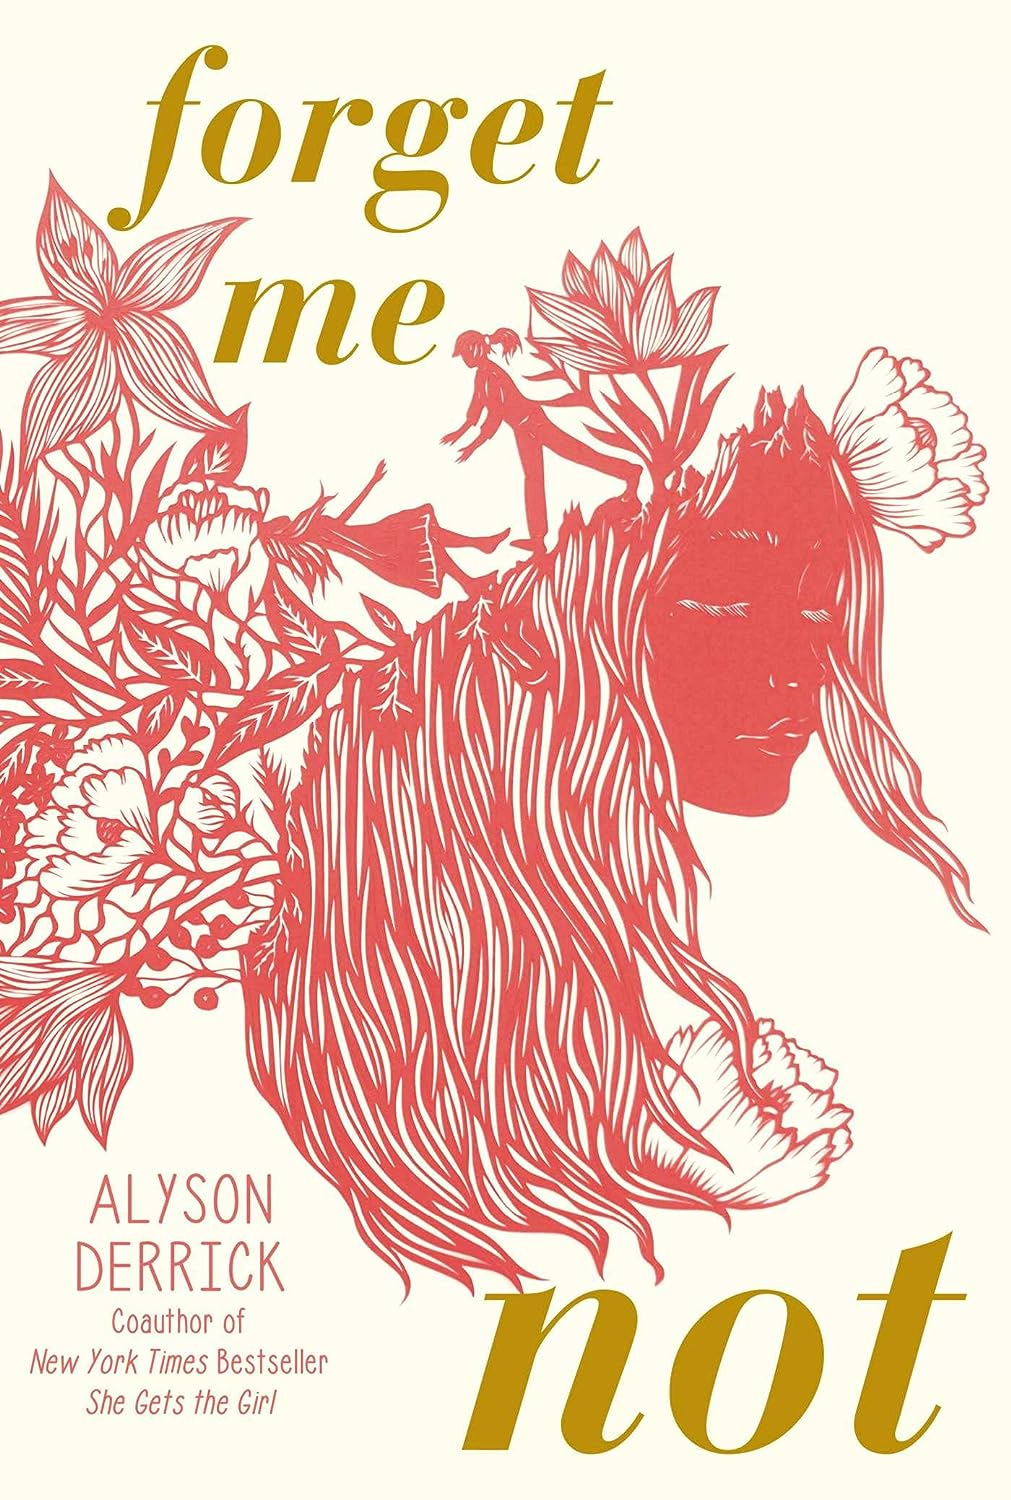 The cover art for the book Forget Me Not by Alyson Derrick